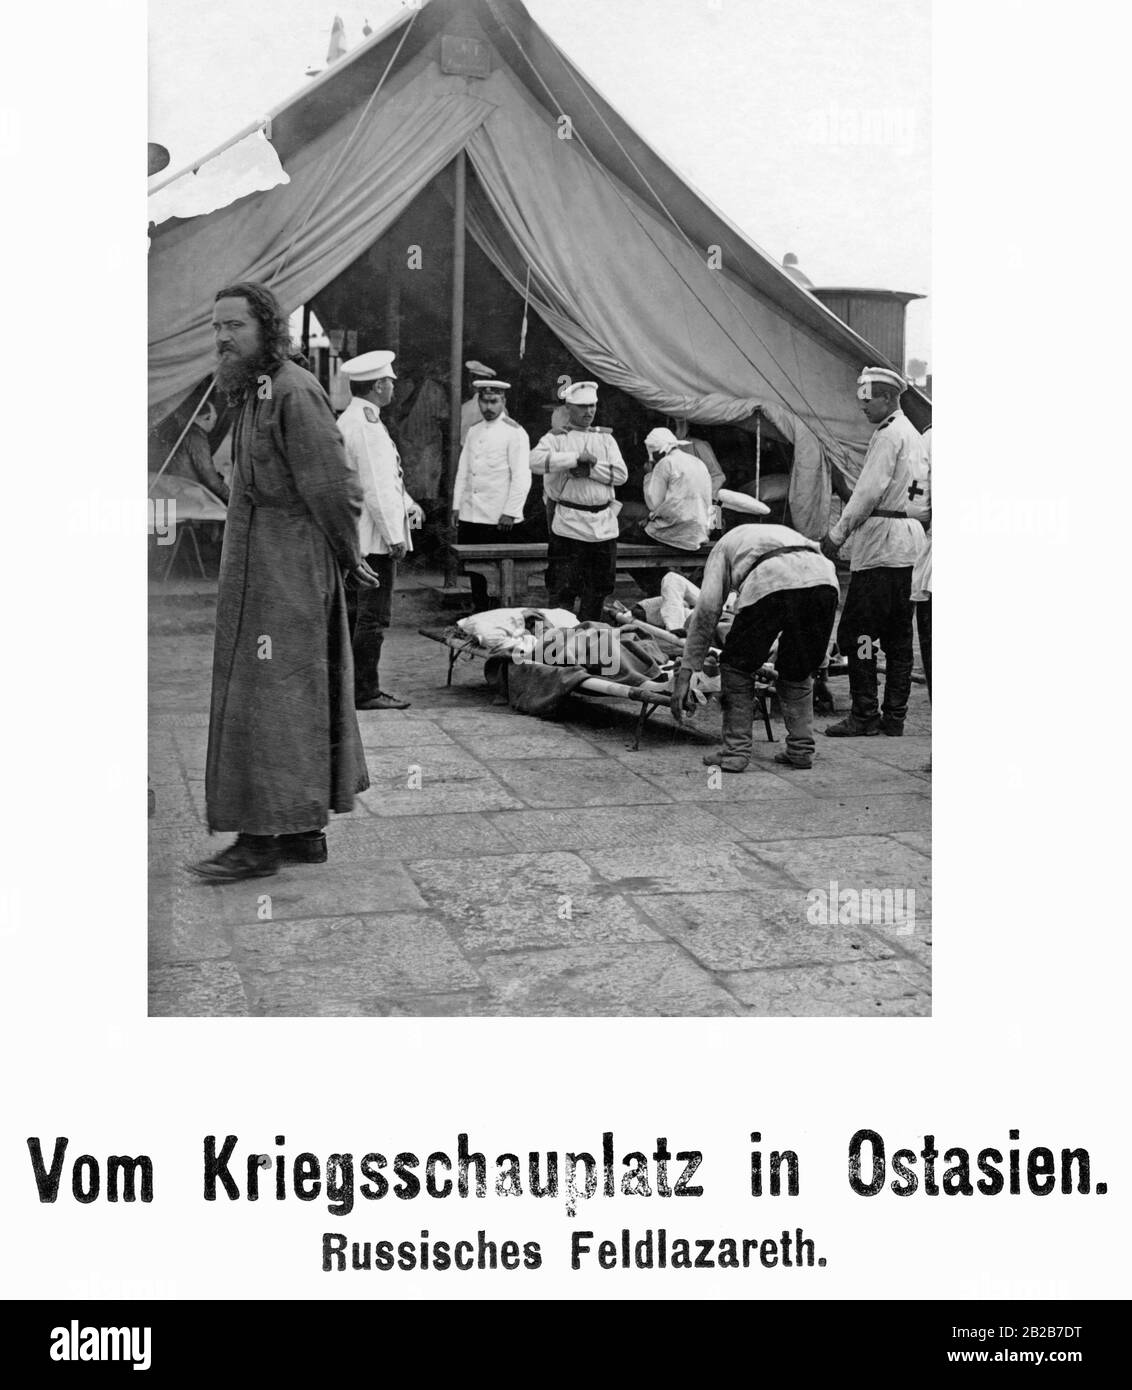 During the Russo-Japanese War in East Asia: Wounded soldiers arrive at the tent of a Russian field hospital. Stock Photo